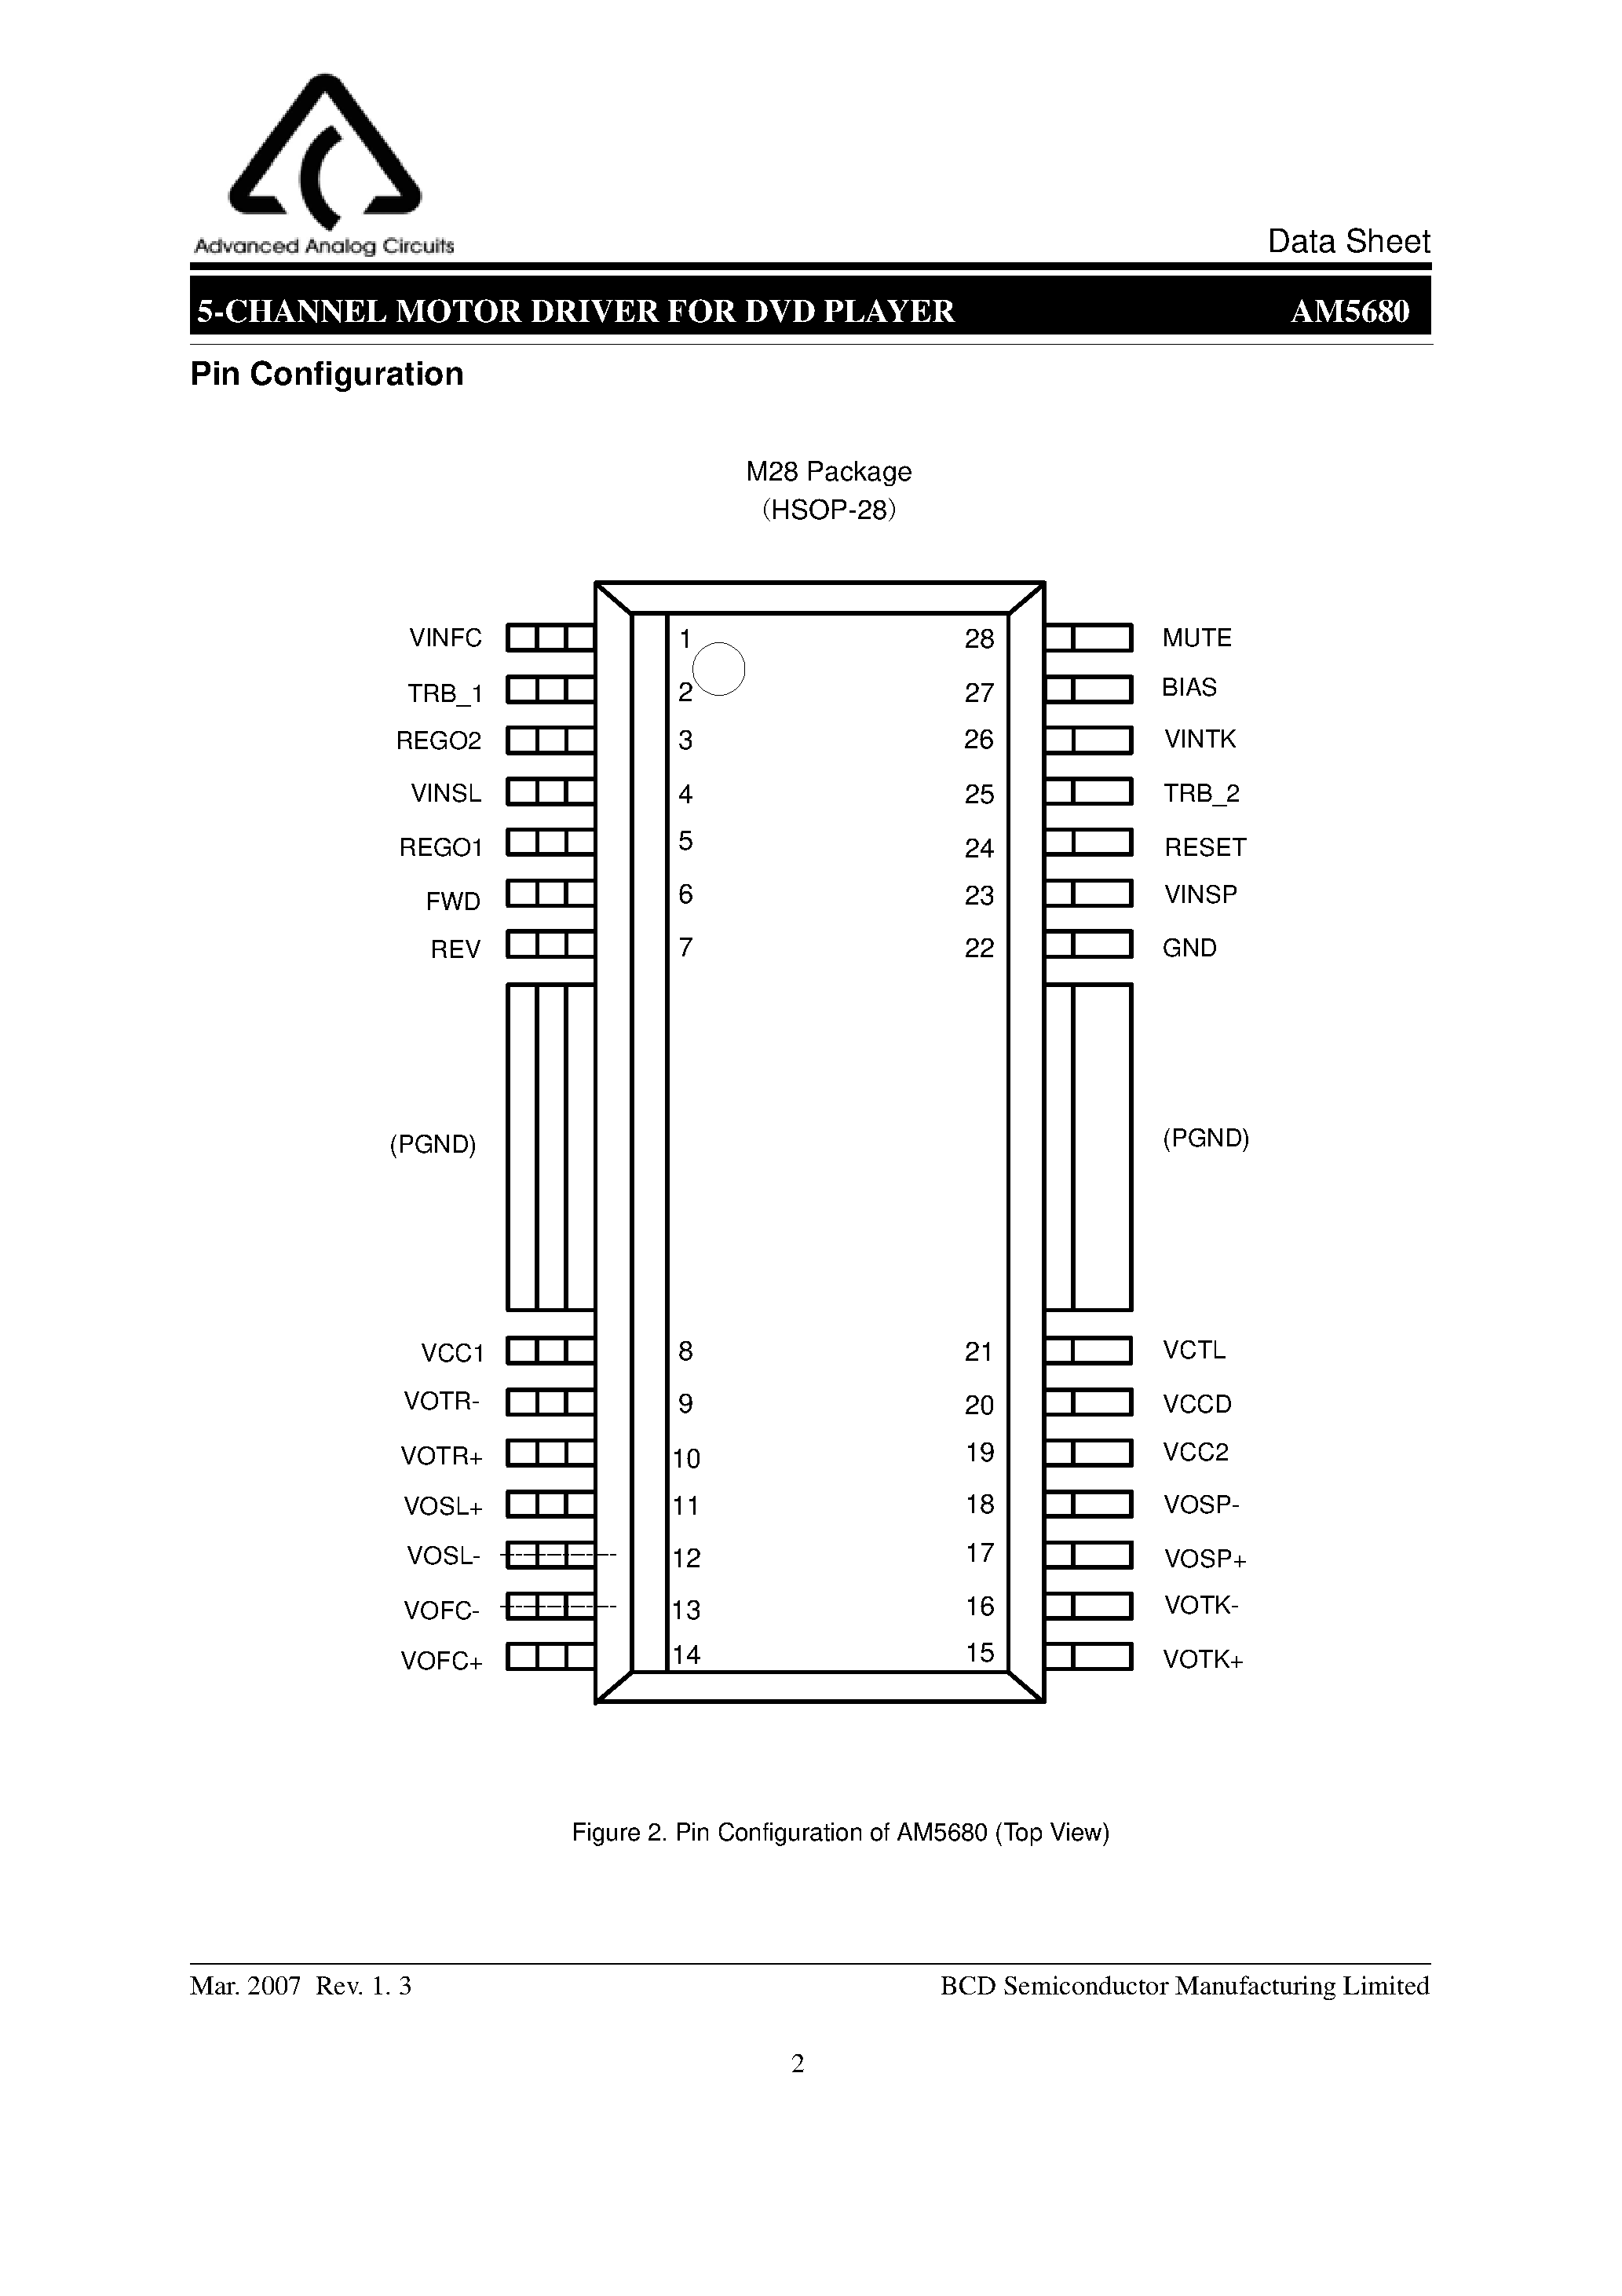 Datasheet AM5680 - 5-CHANNEL MOTOR DRIVER page 2